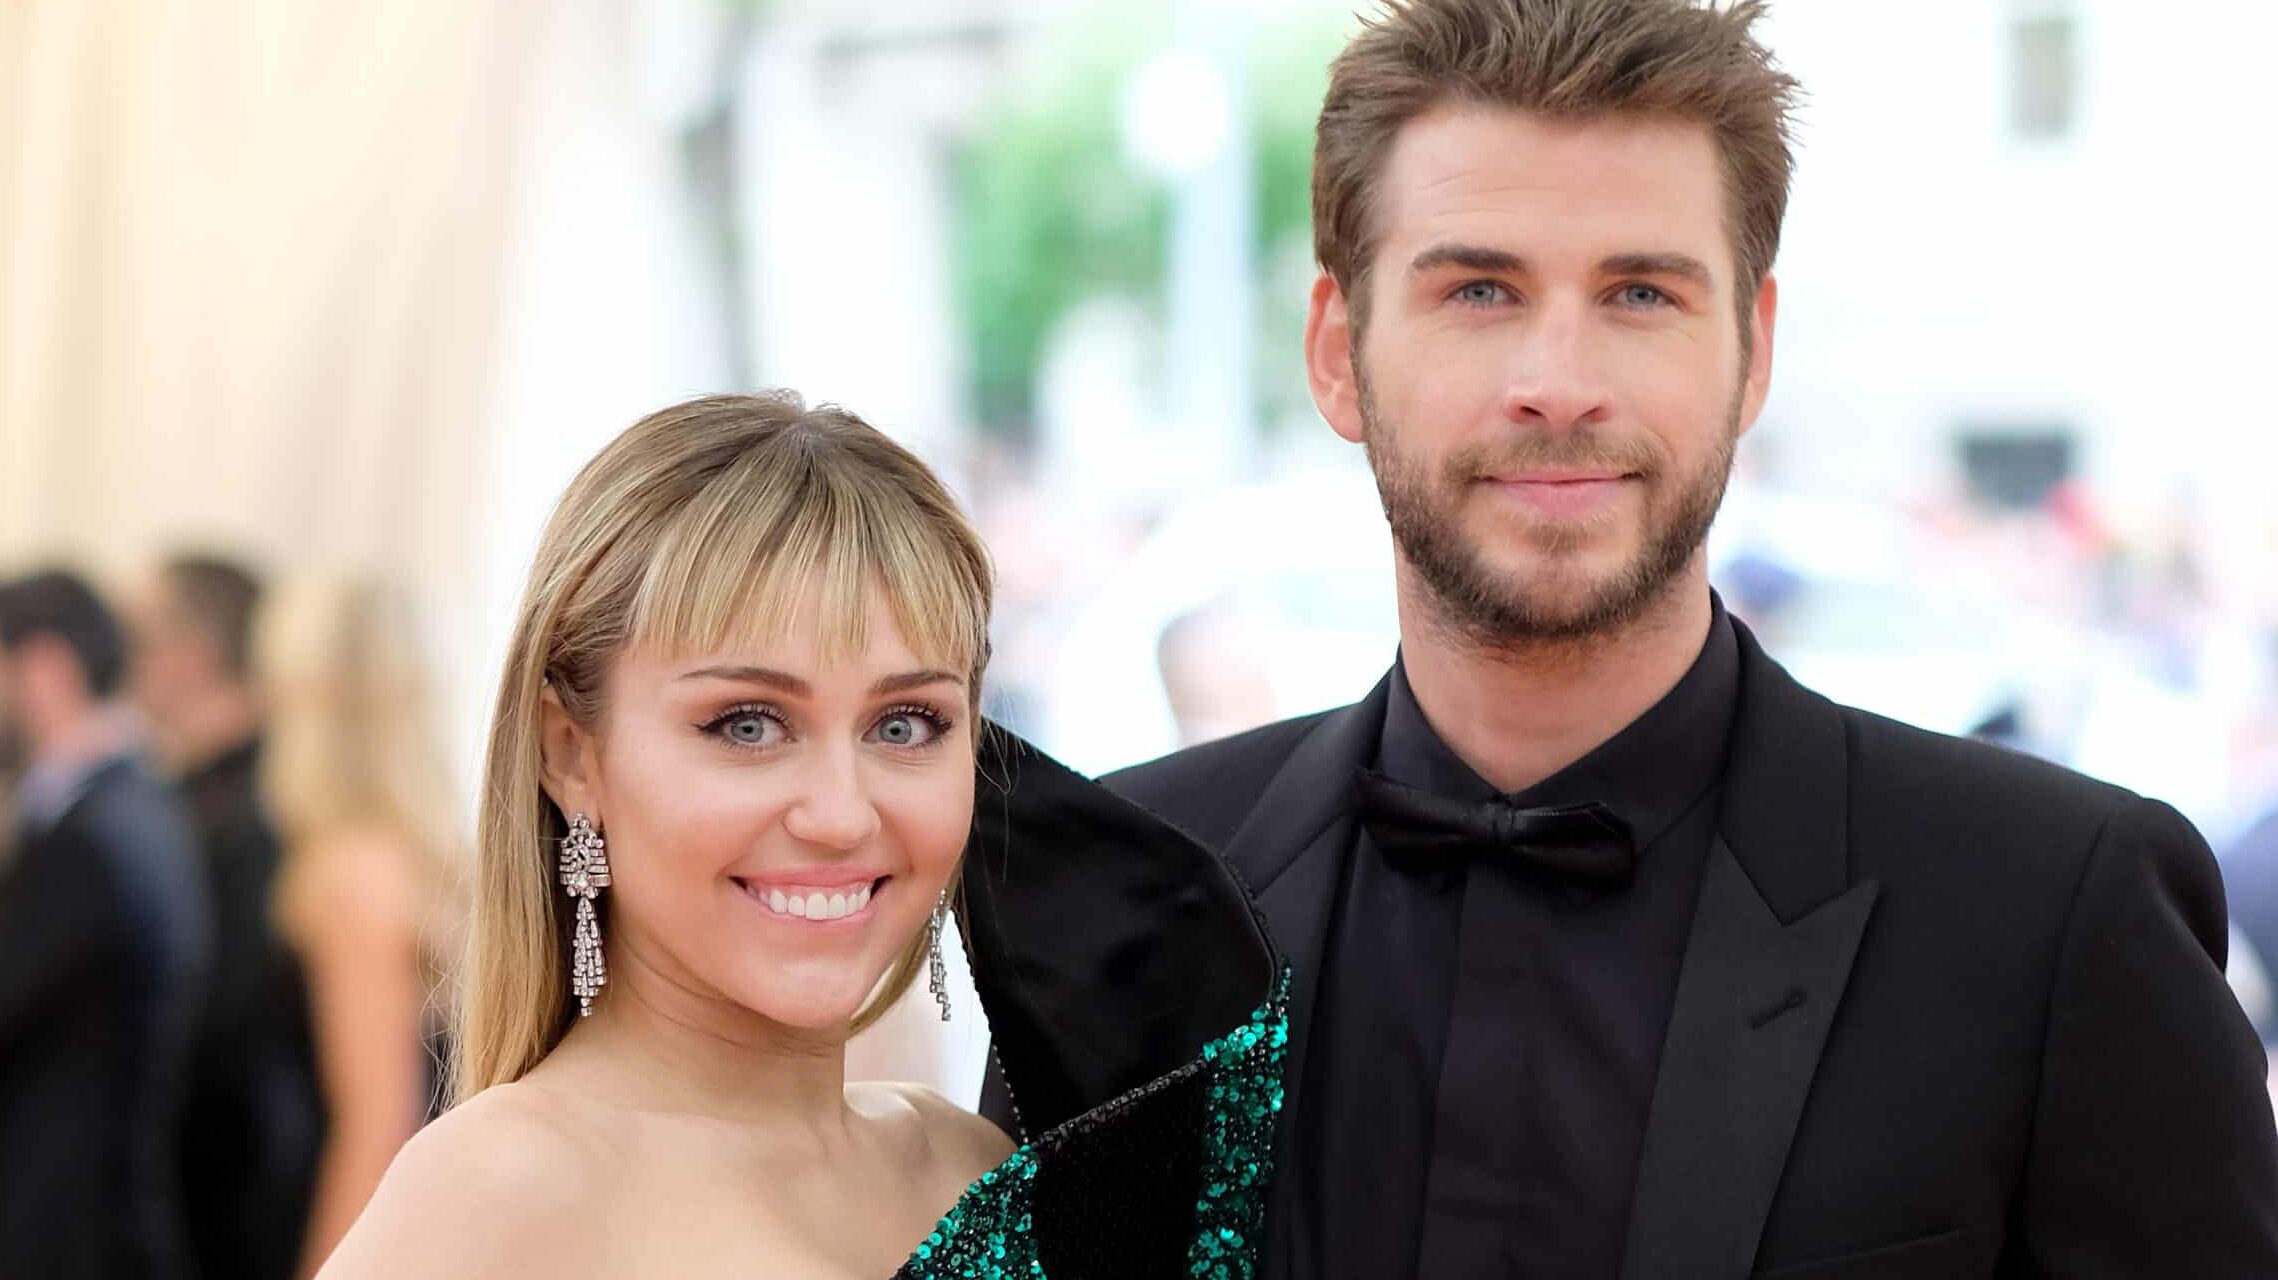 Miley Cyrus and Liam Hemsworth attend The 2019 Met Gala Celebrating Camp: Notes on Fashion at Metropolitan Museum of Art on May 06, 2019 in New York City.